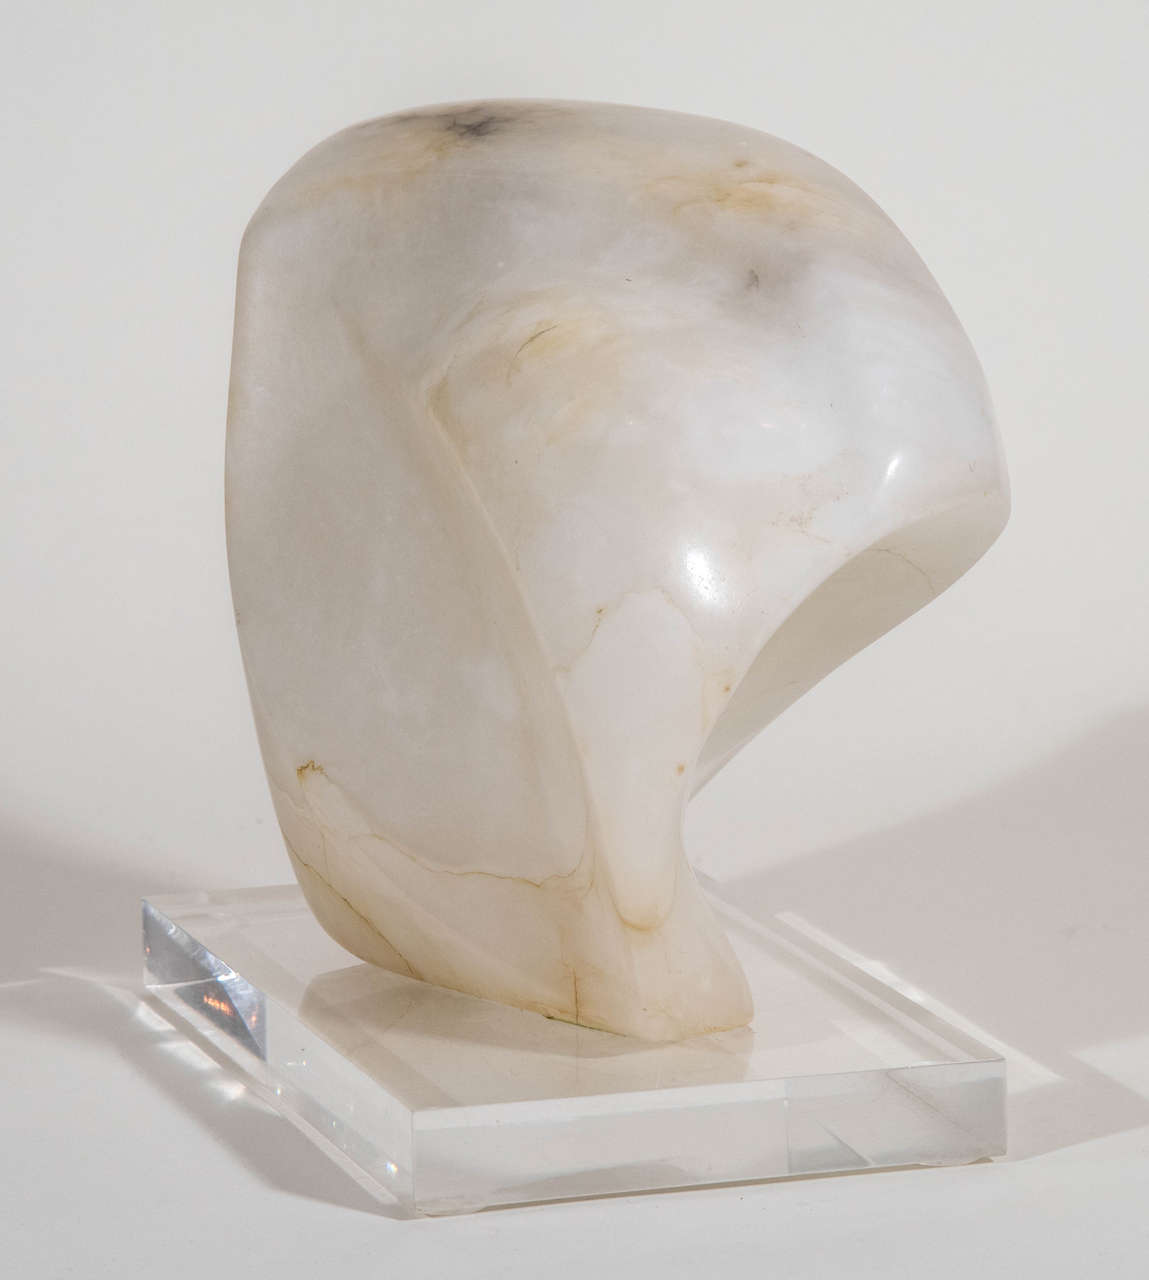 A sensuous and lustrous alabaster sculpture on original lucite base.
The piece is very decorative and signed on the bottom Blo 99.